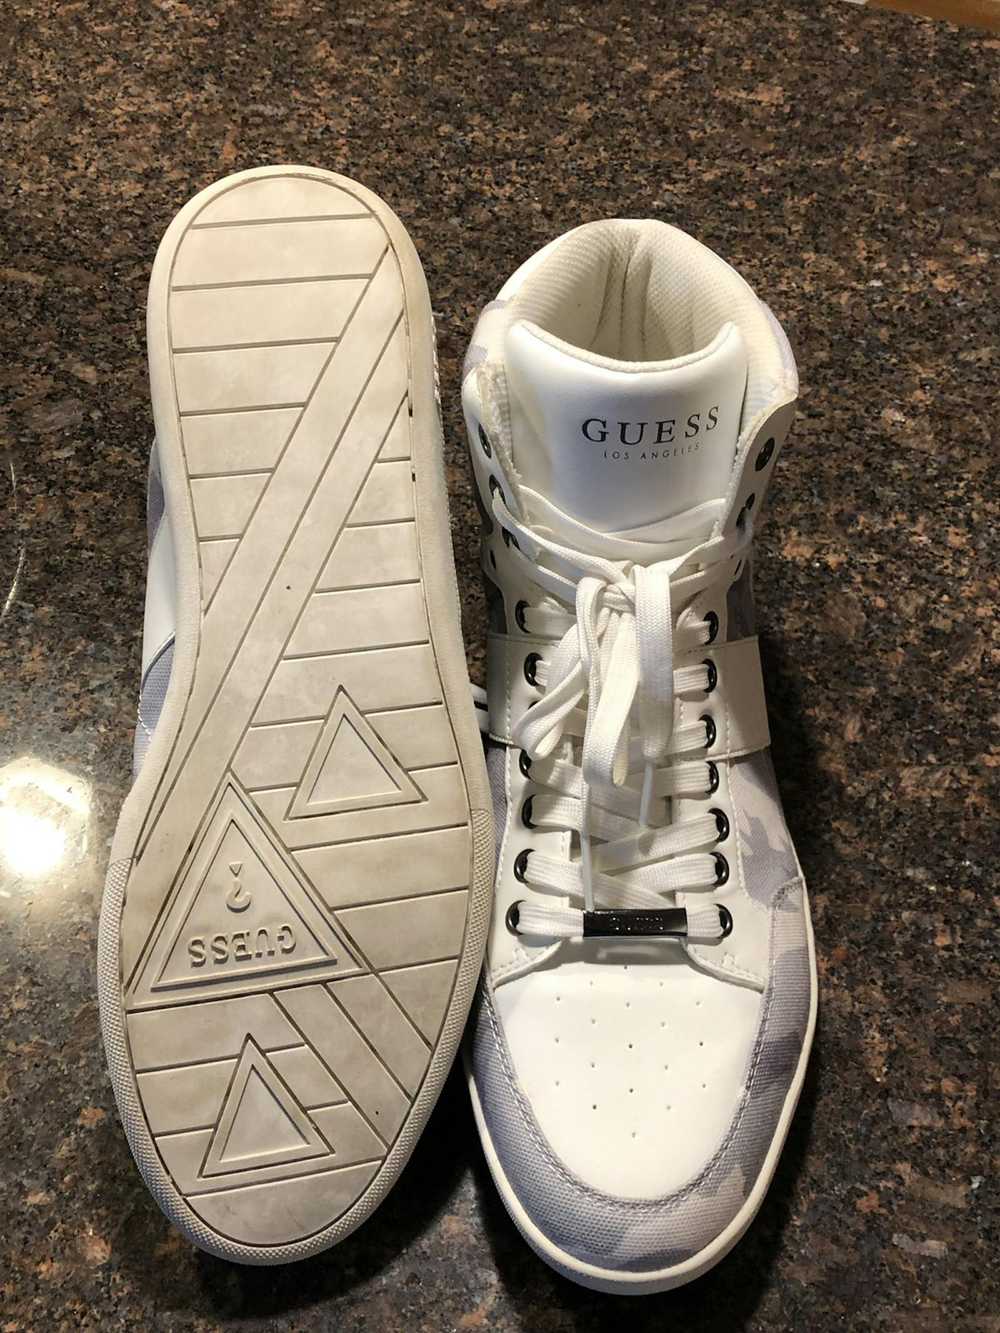 Guess Guess high top shoe very clean light use - image 4